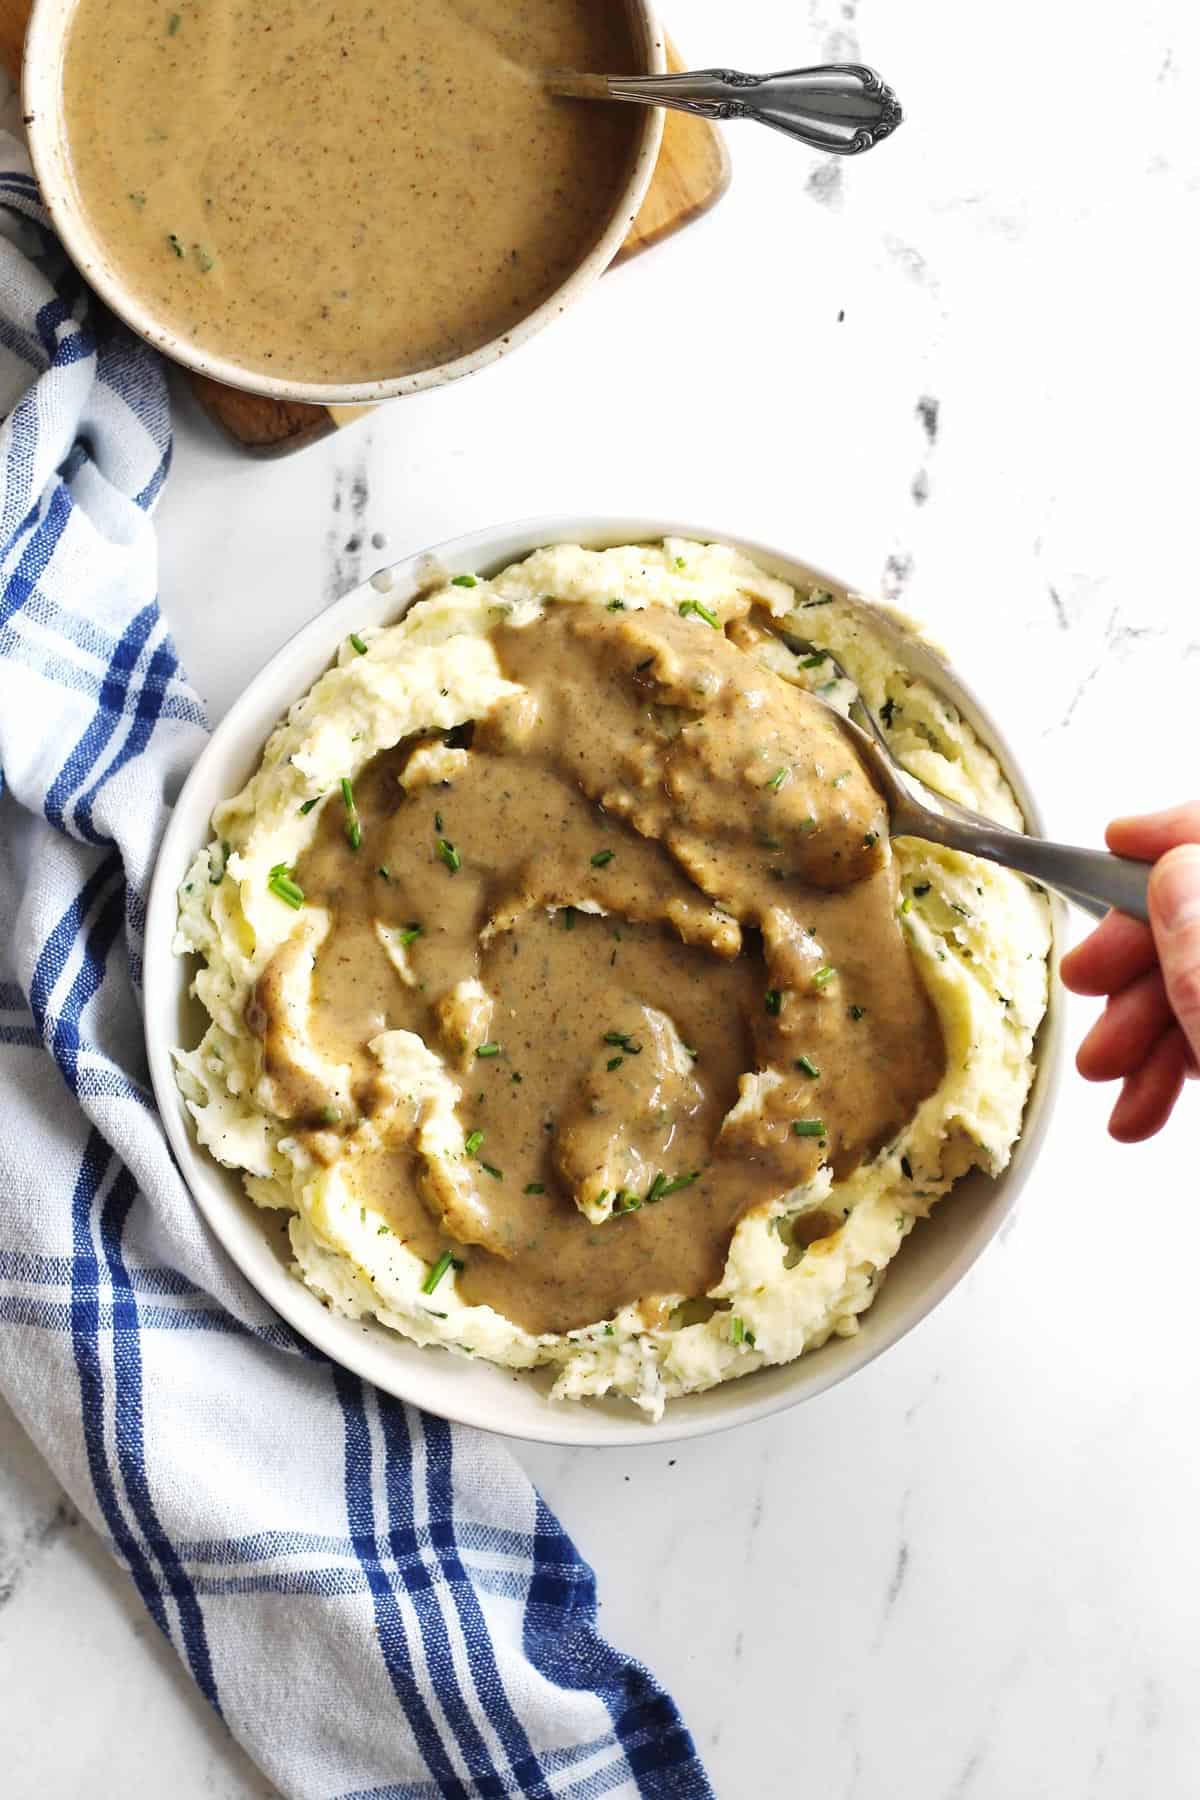 Mashed potatoes topped with gravy in a white bowl